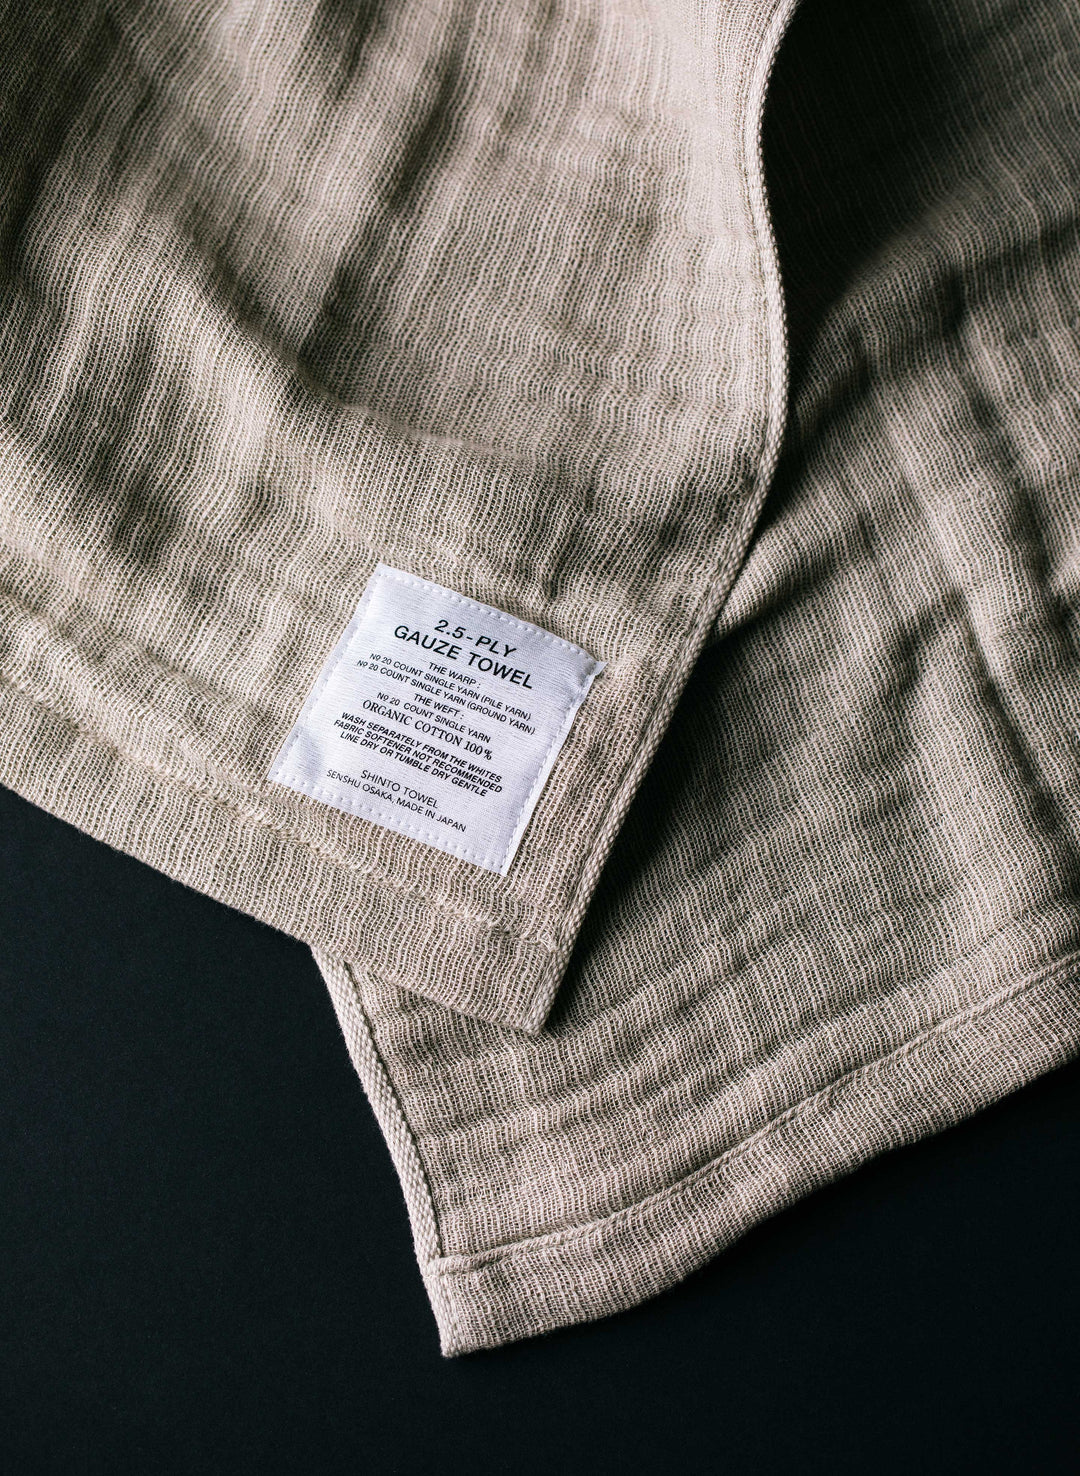 a cloth with a label on it